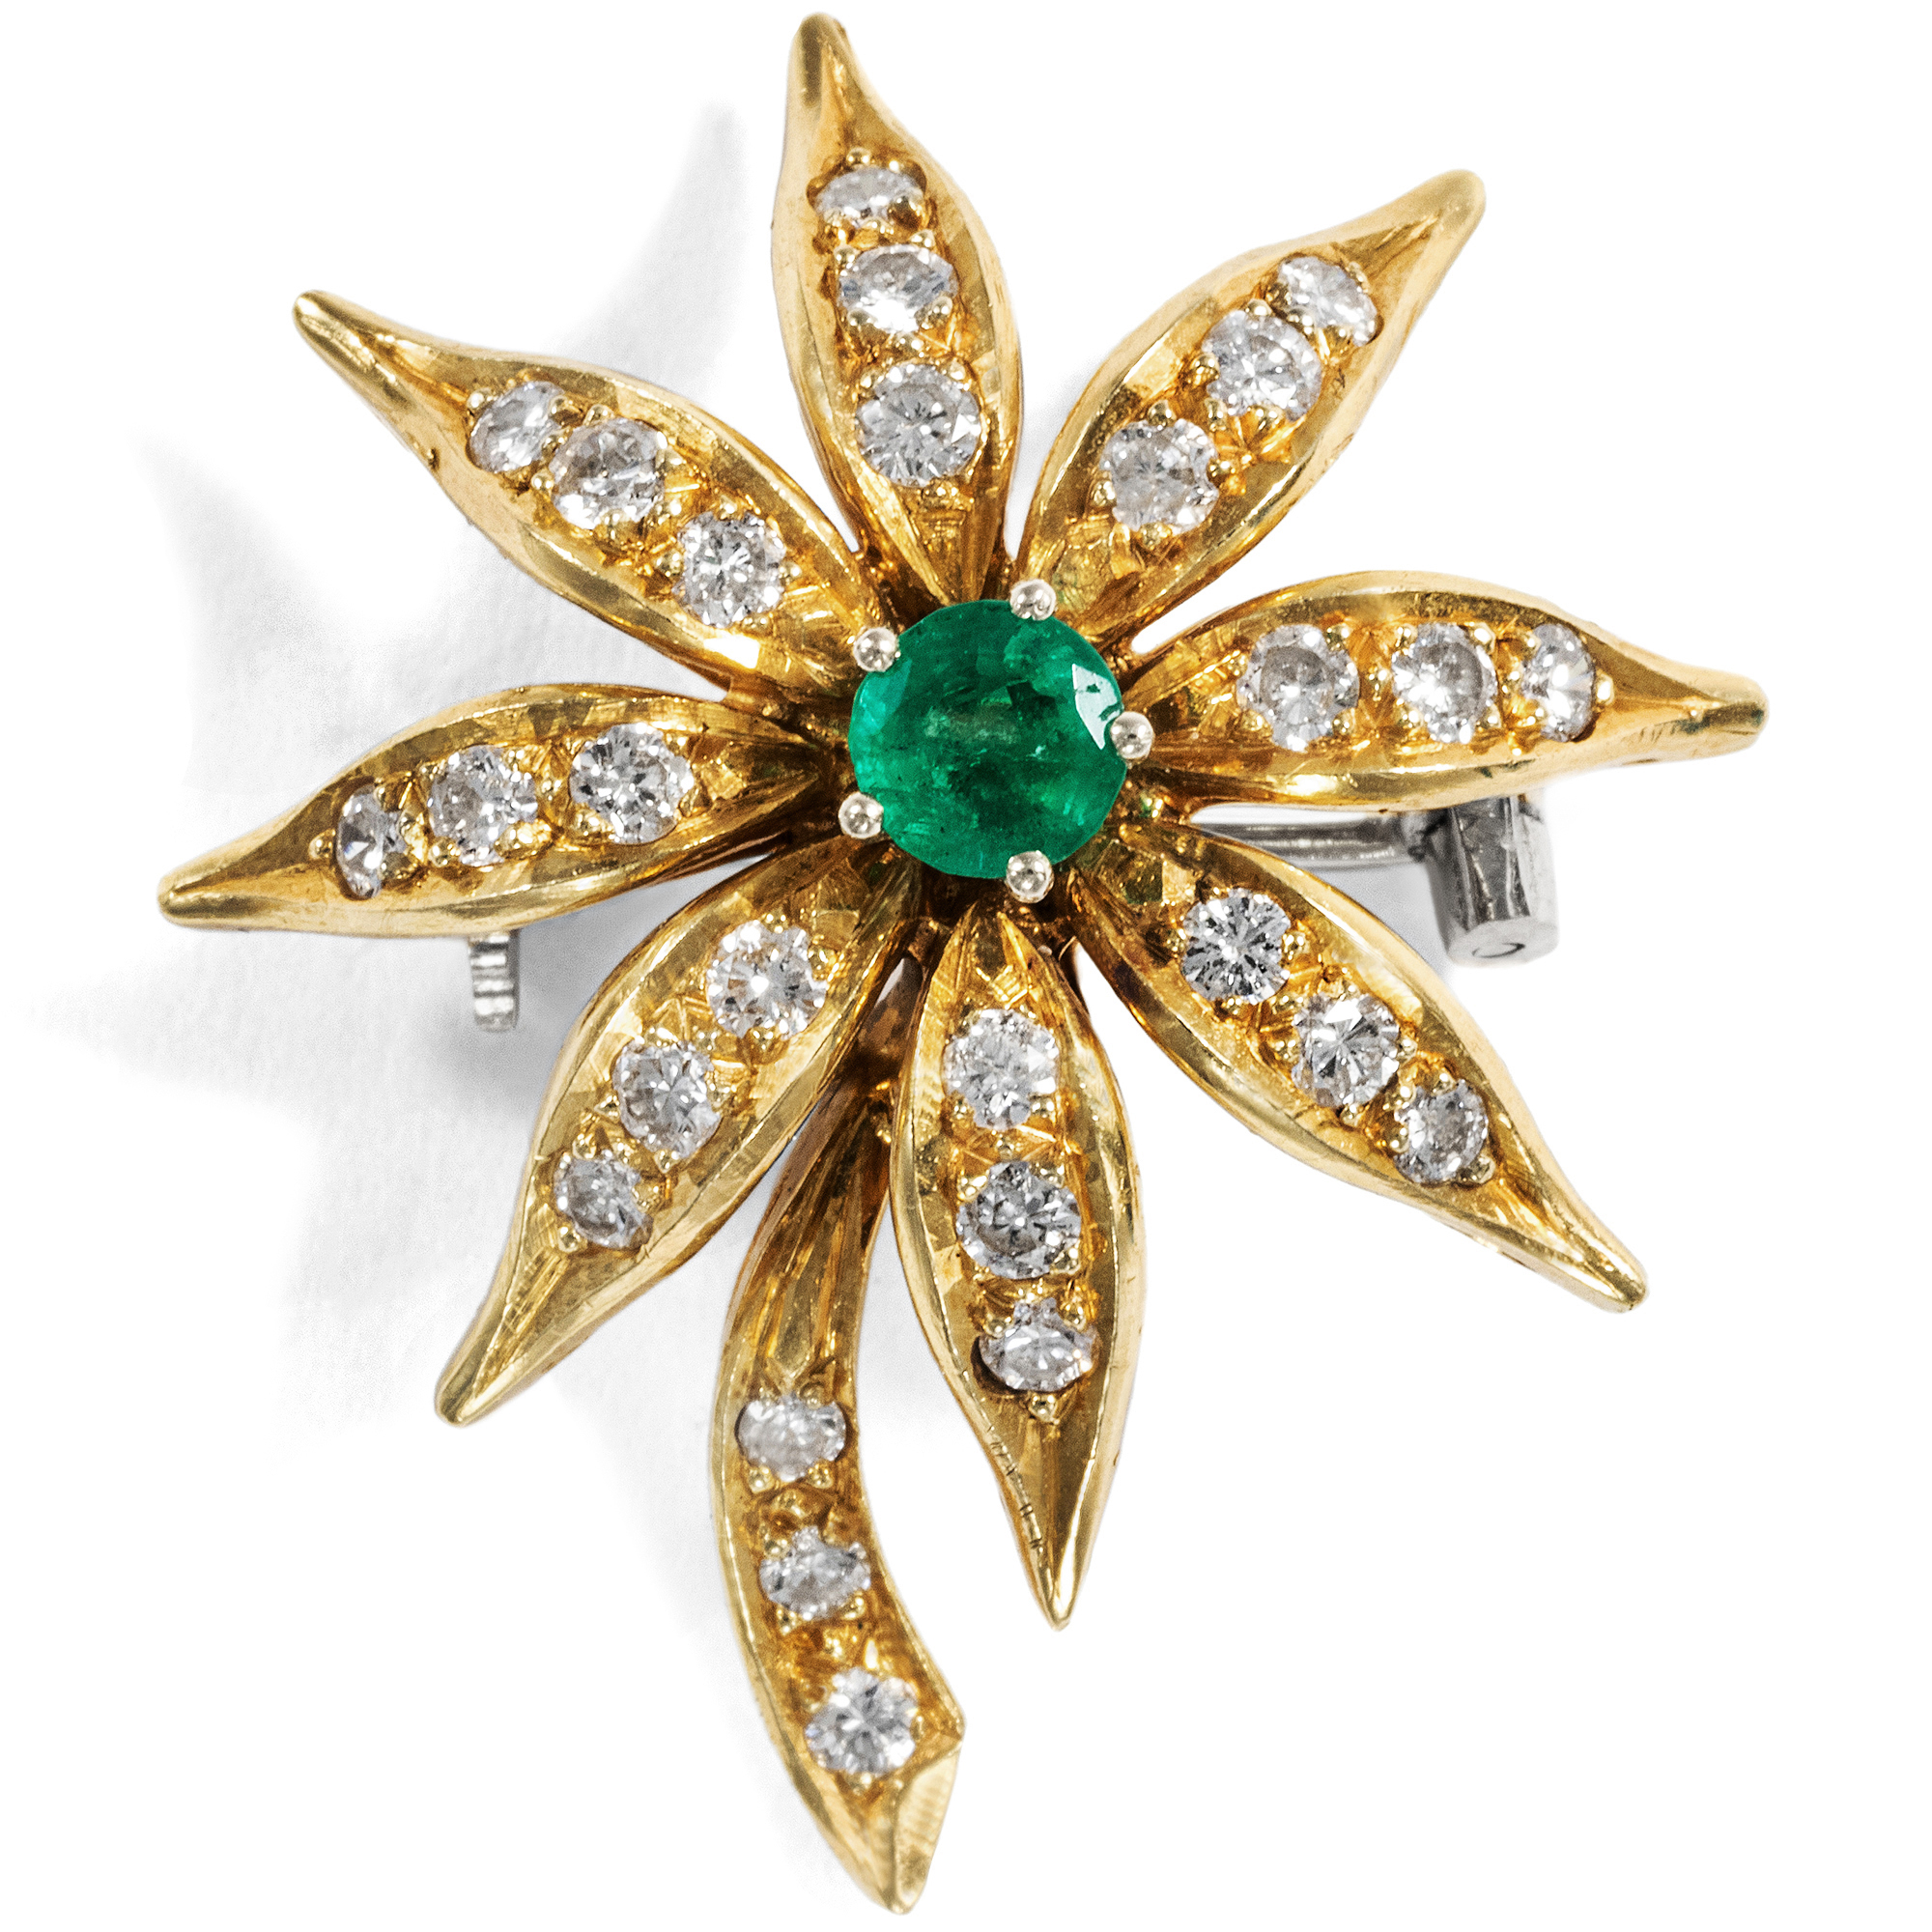 Vintage Brooch with Emerald & Diamonds in Gold, Italy c. 1985